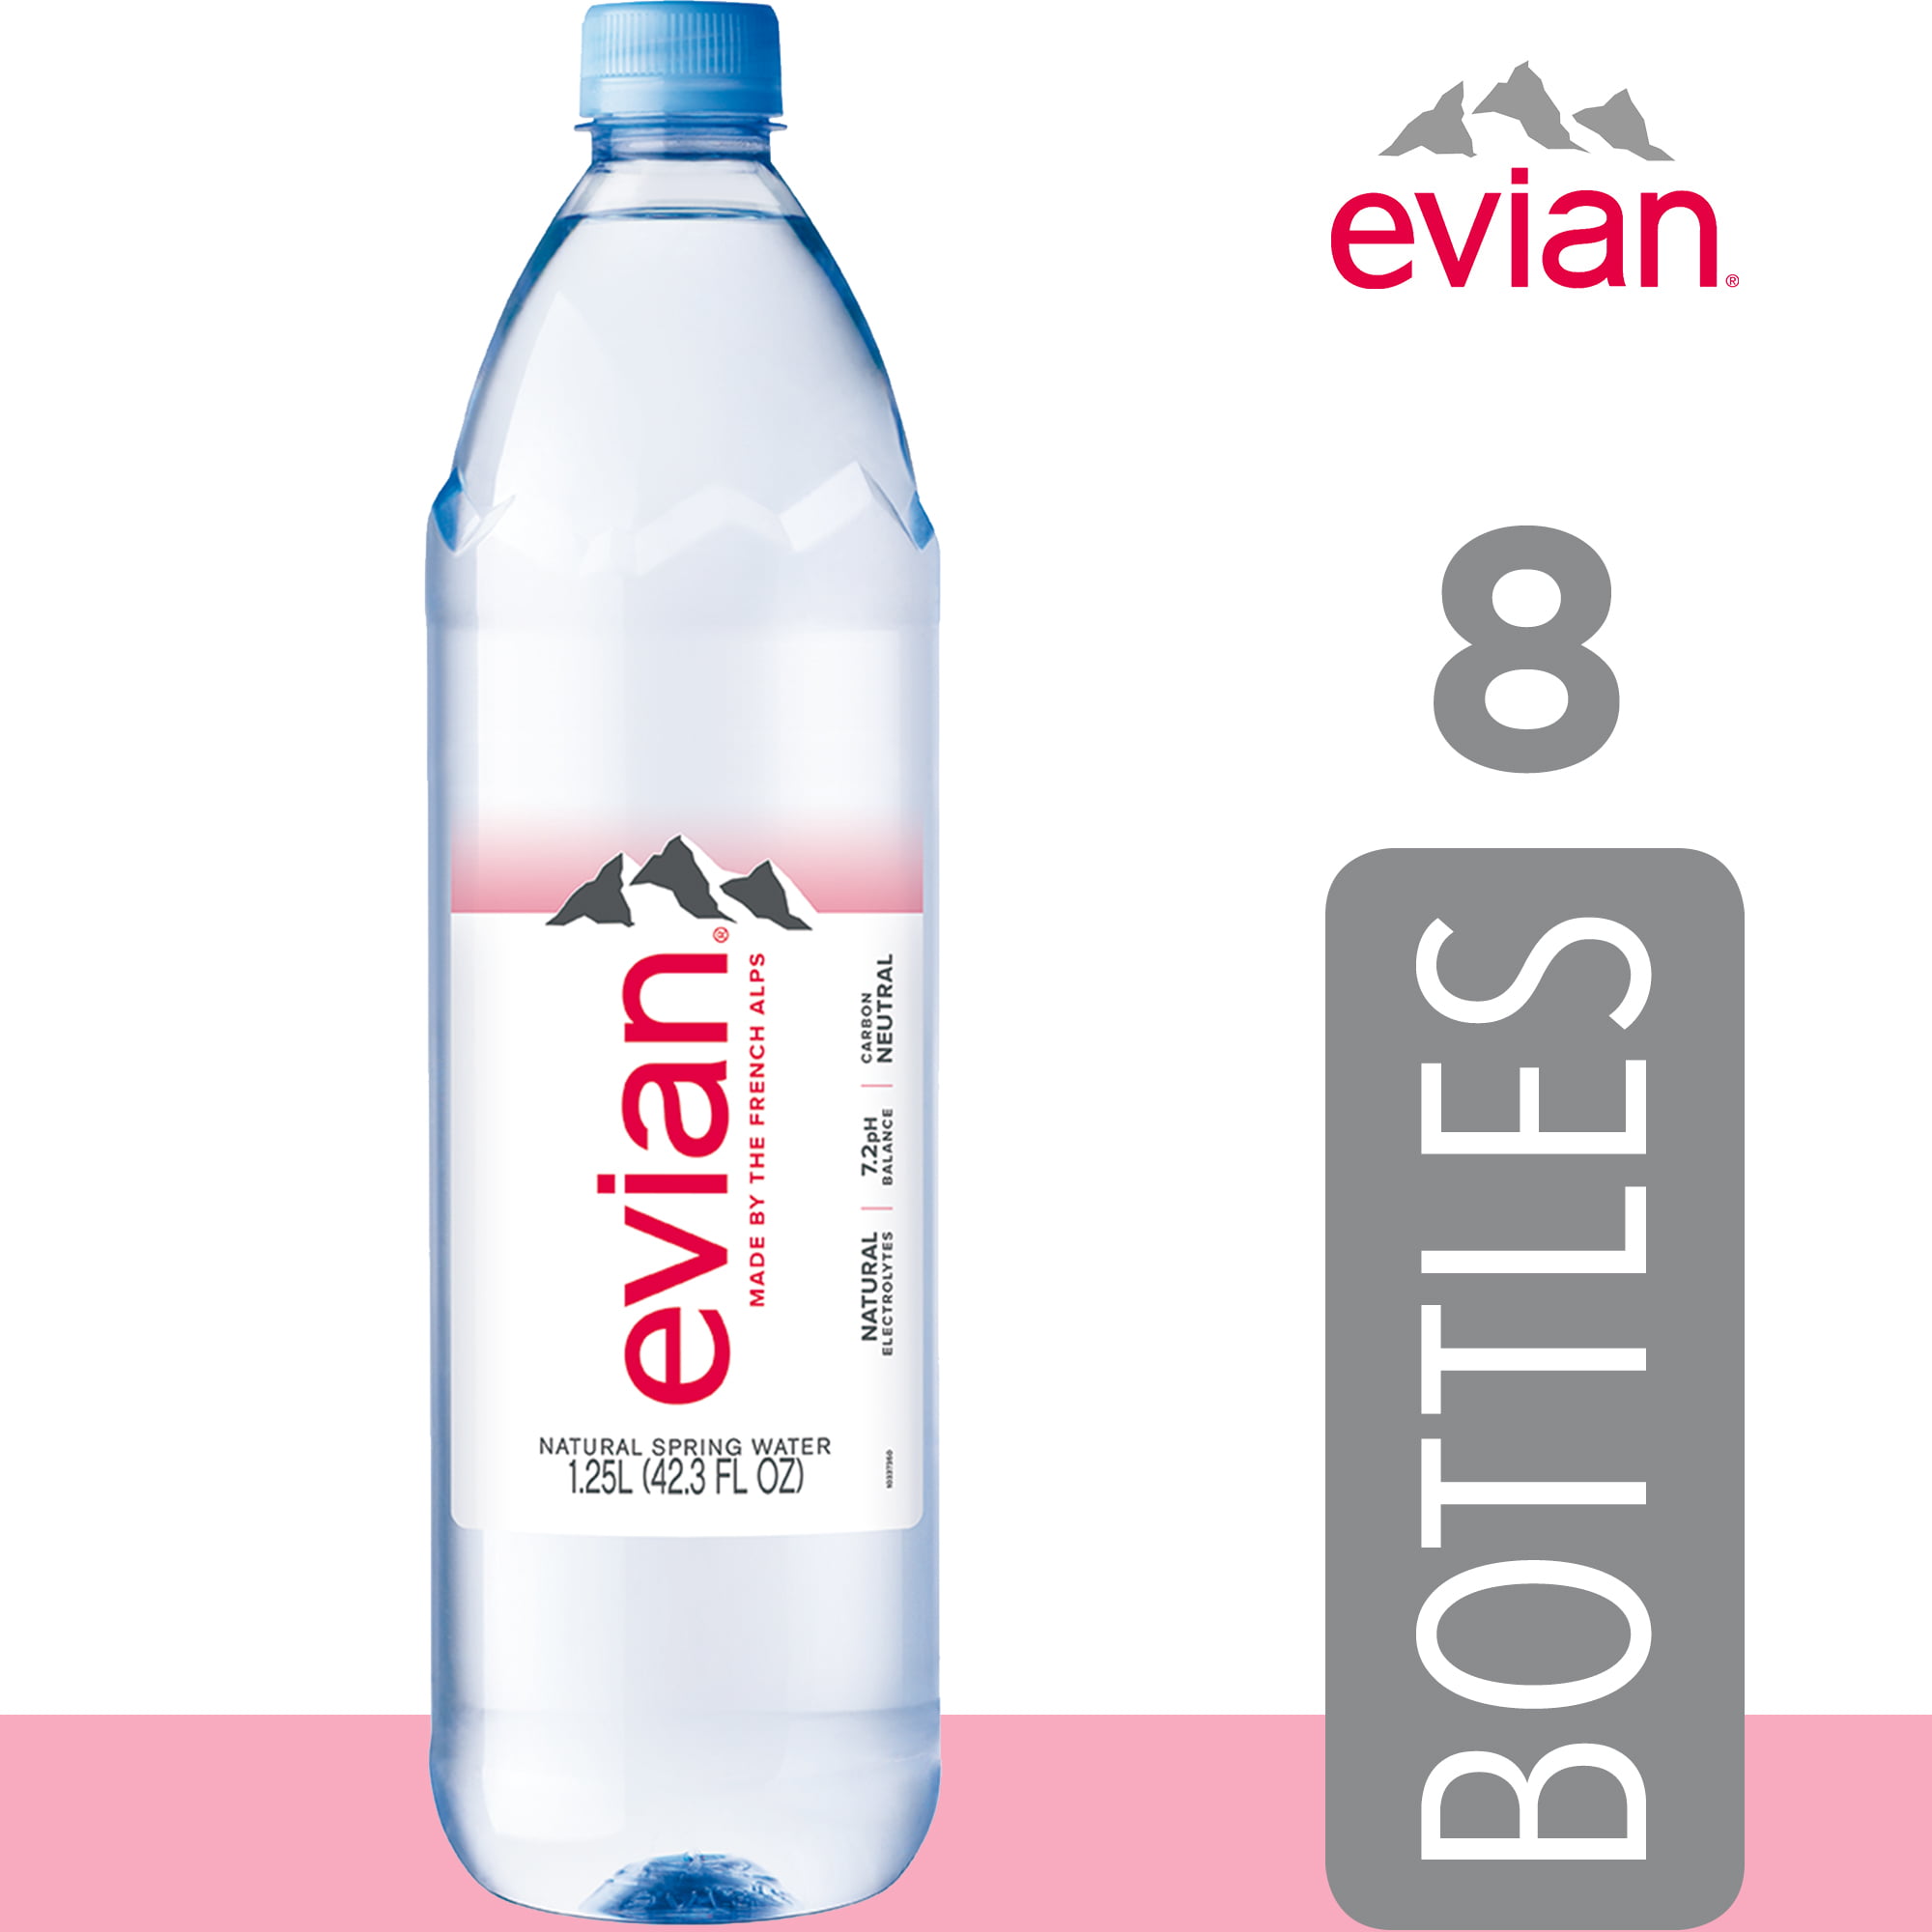 2 Pack, evian Natural Spring Water Bottles, Naturally Filtered Spring Water,  1.25 L bottle, 4 Count 